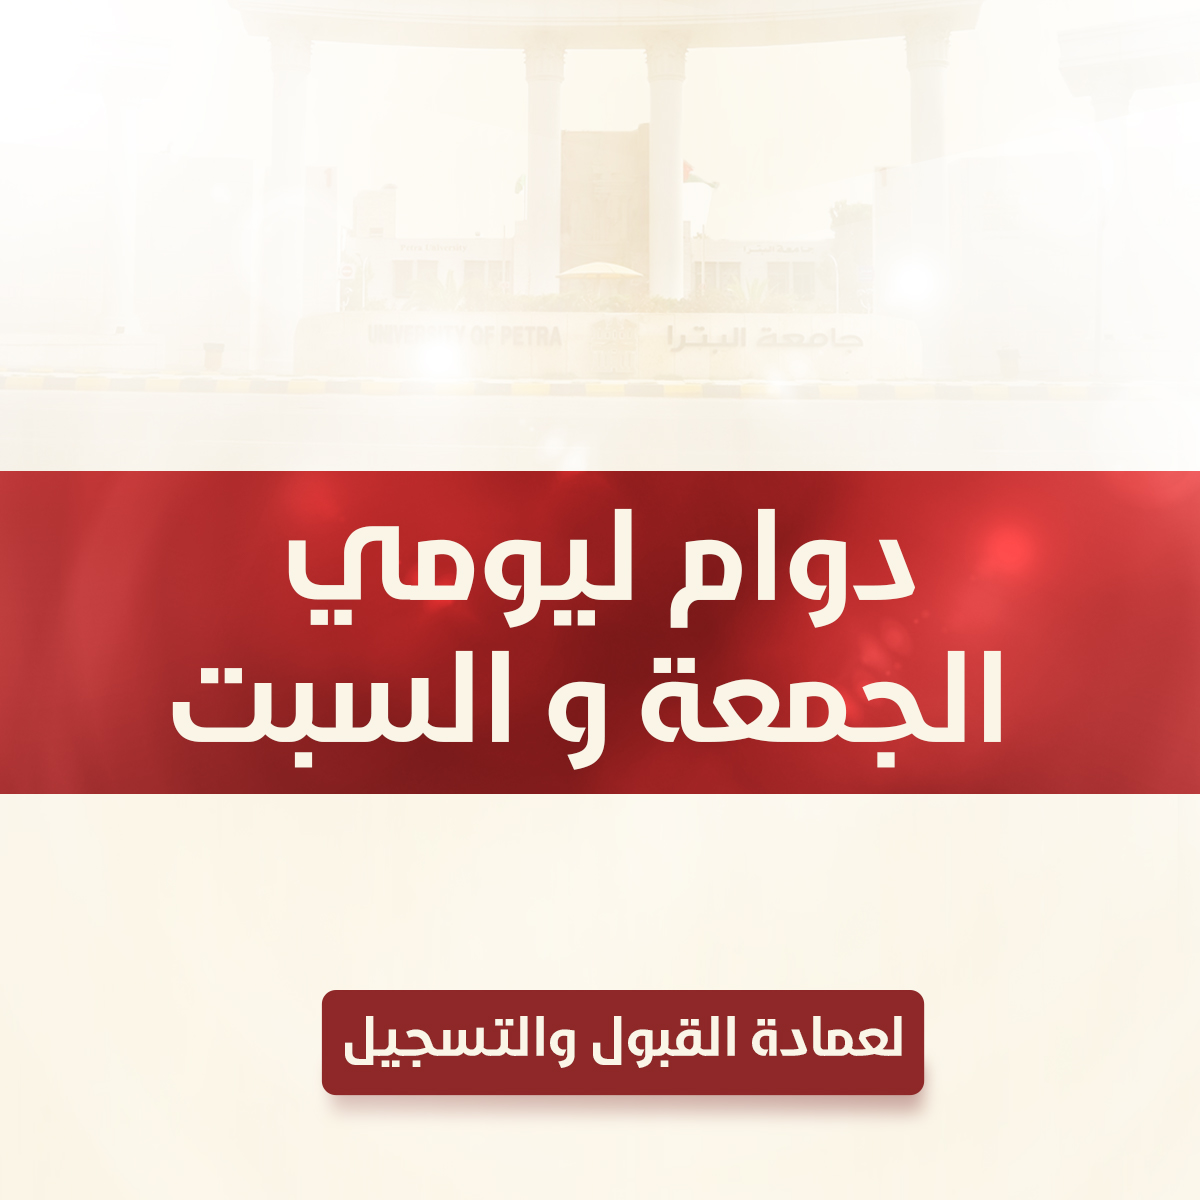 The Working Hours of the Deanship of Admissions and Registration and the Finance Department for Friday and Saturday